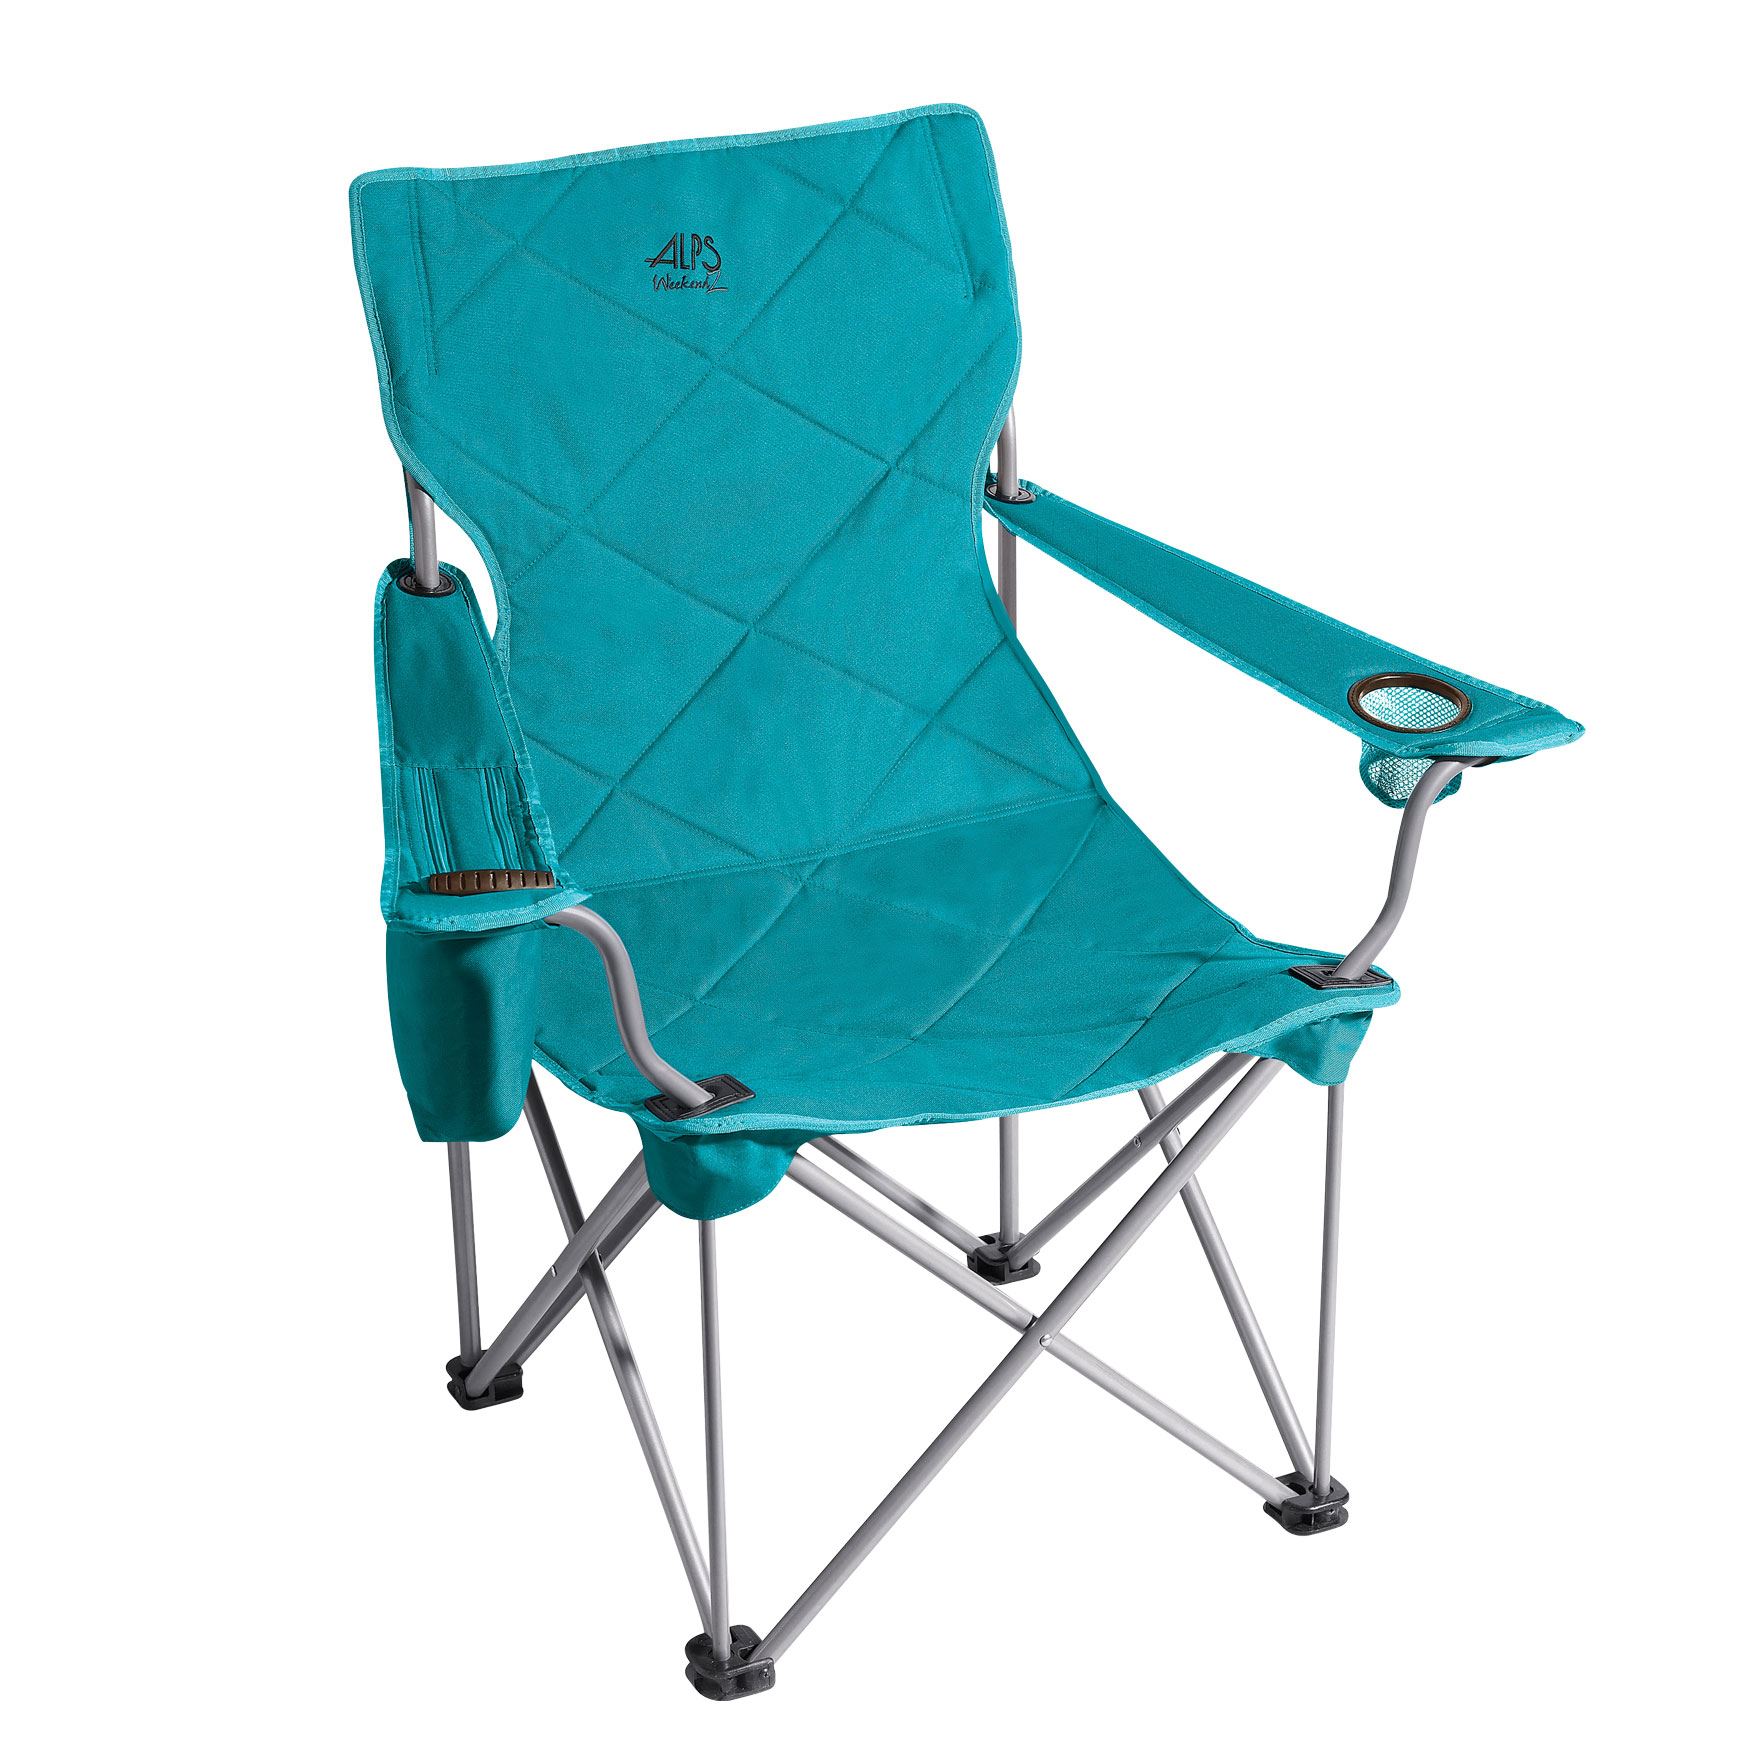 Extra Wide King Kong Folding Camp Chair Plus Size